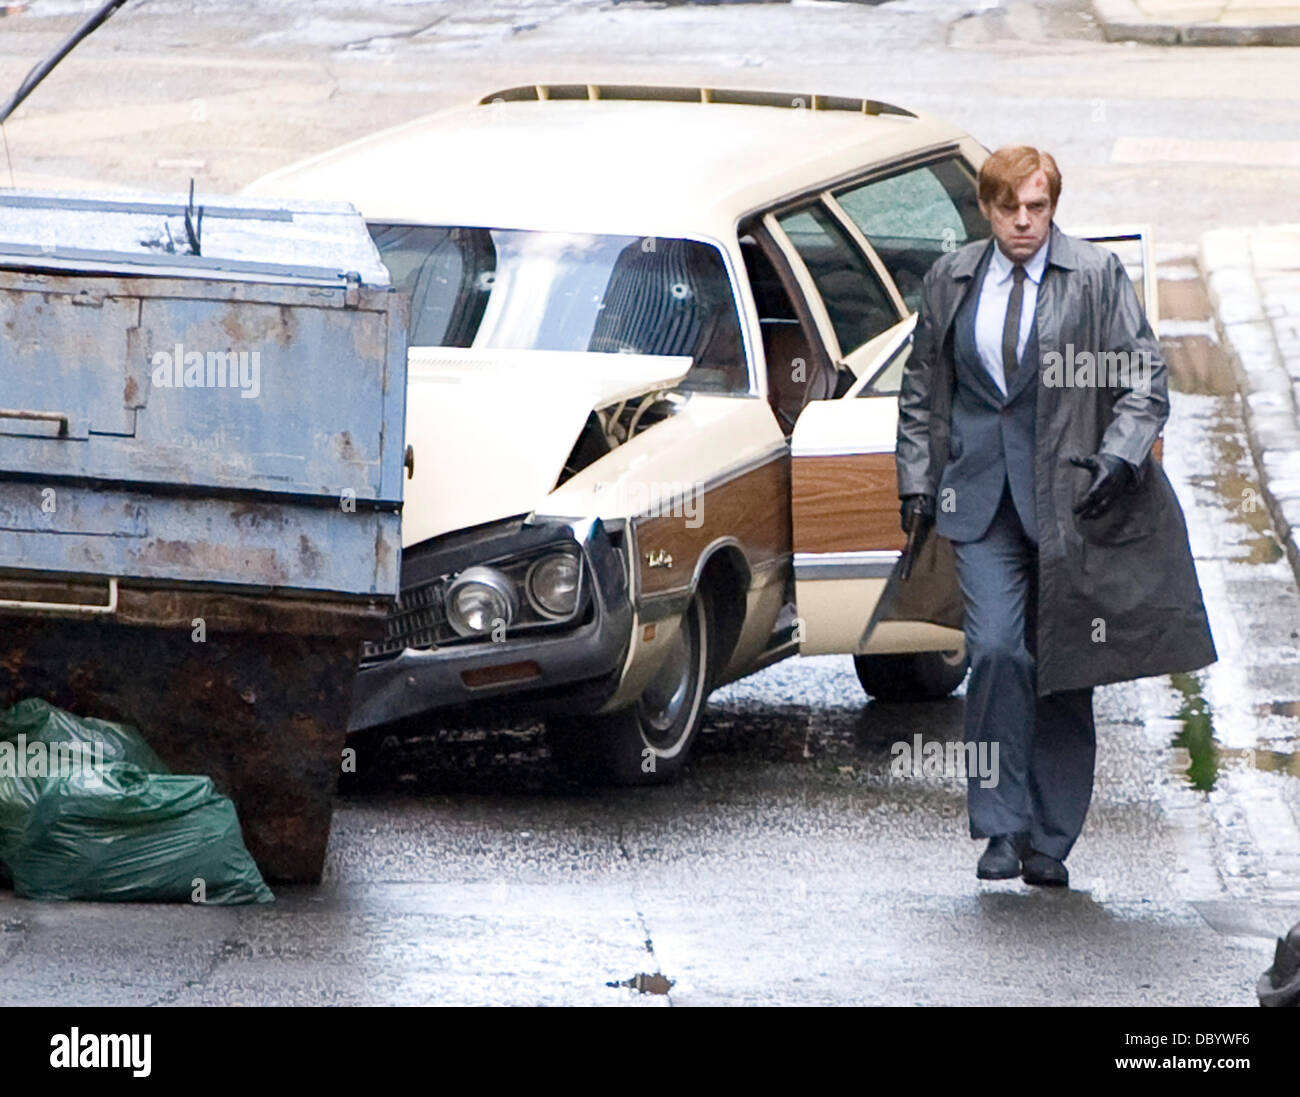 Latest Hugo Weaving pics from the set of Cloud Atlas in Glasgow